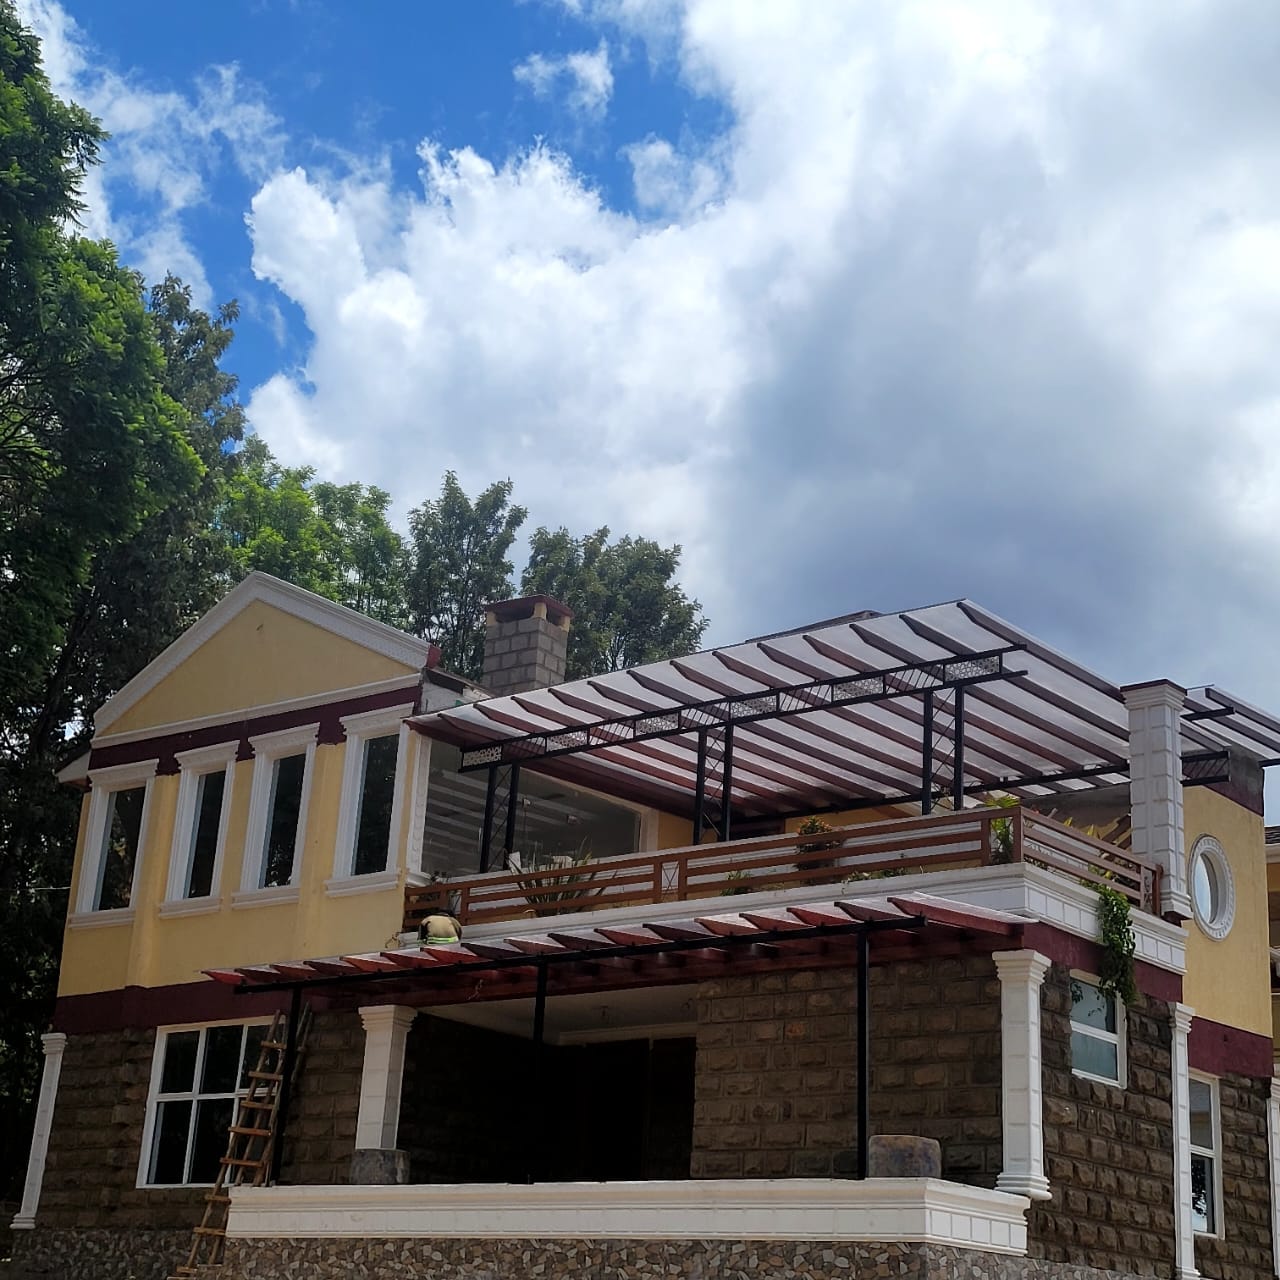 Polycarbonate Pergolas in Kenya-Outdoor shades to protect against the rain and sun